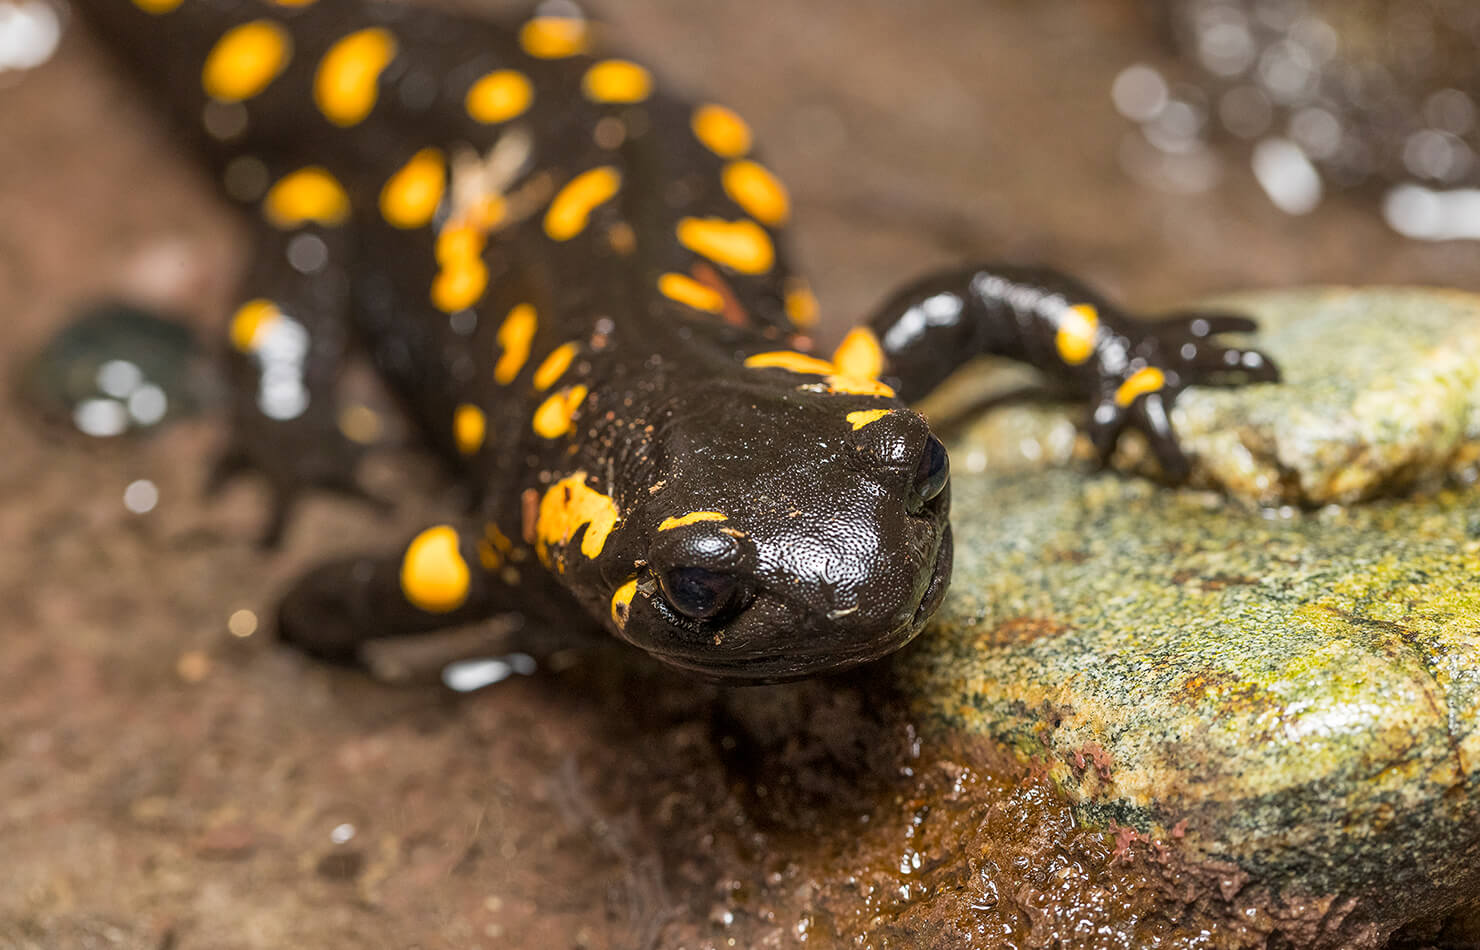 what is the difference between a salamander and a newt and how can you tell them apart